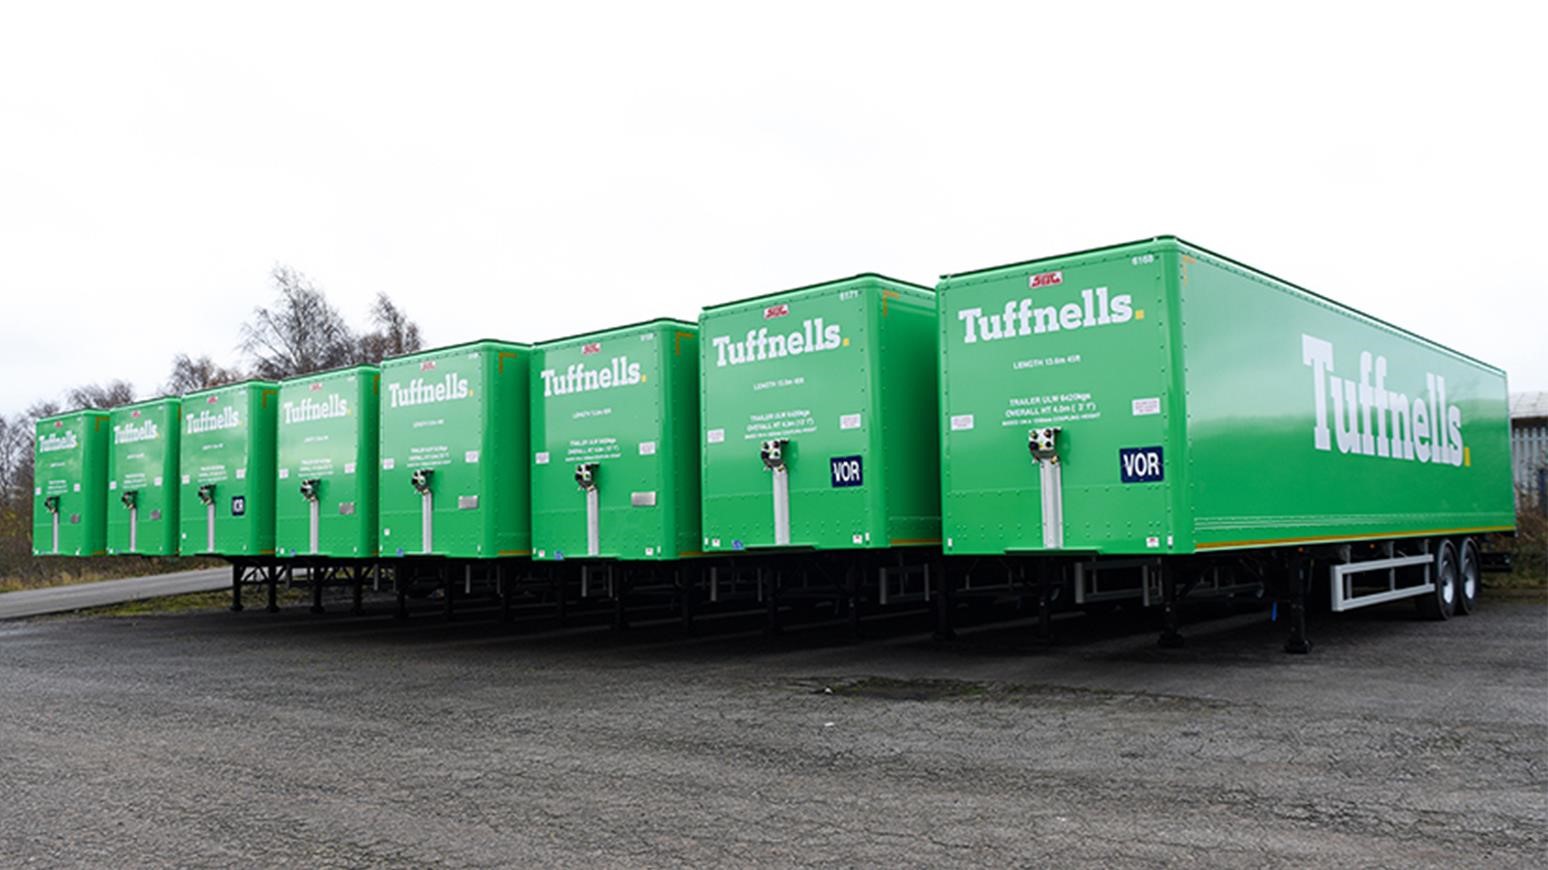 Parcel Delivery Services Provider Orders 220 New SDC Boxvan & Curtainsider Trailers